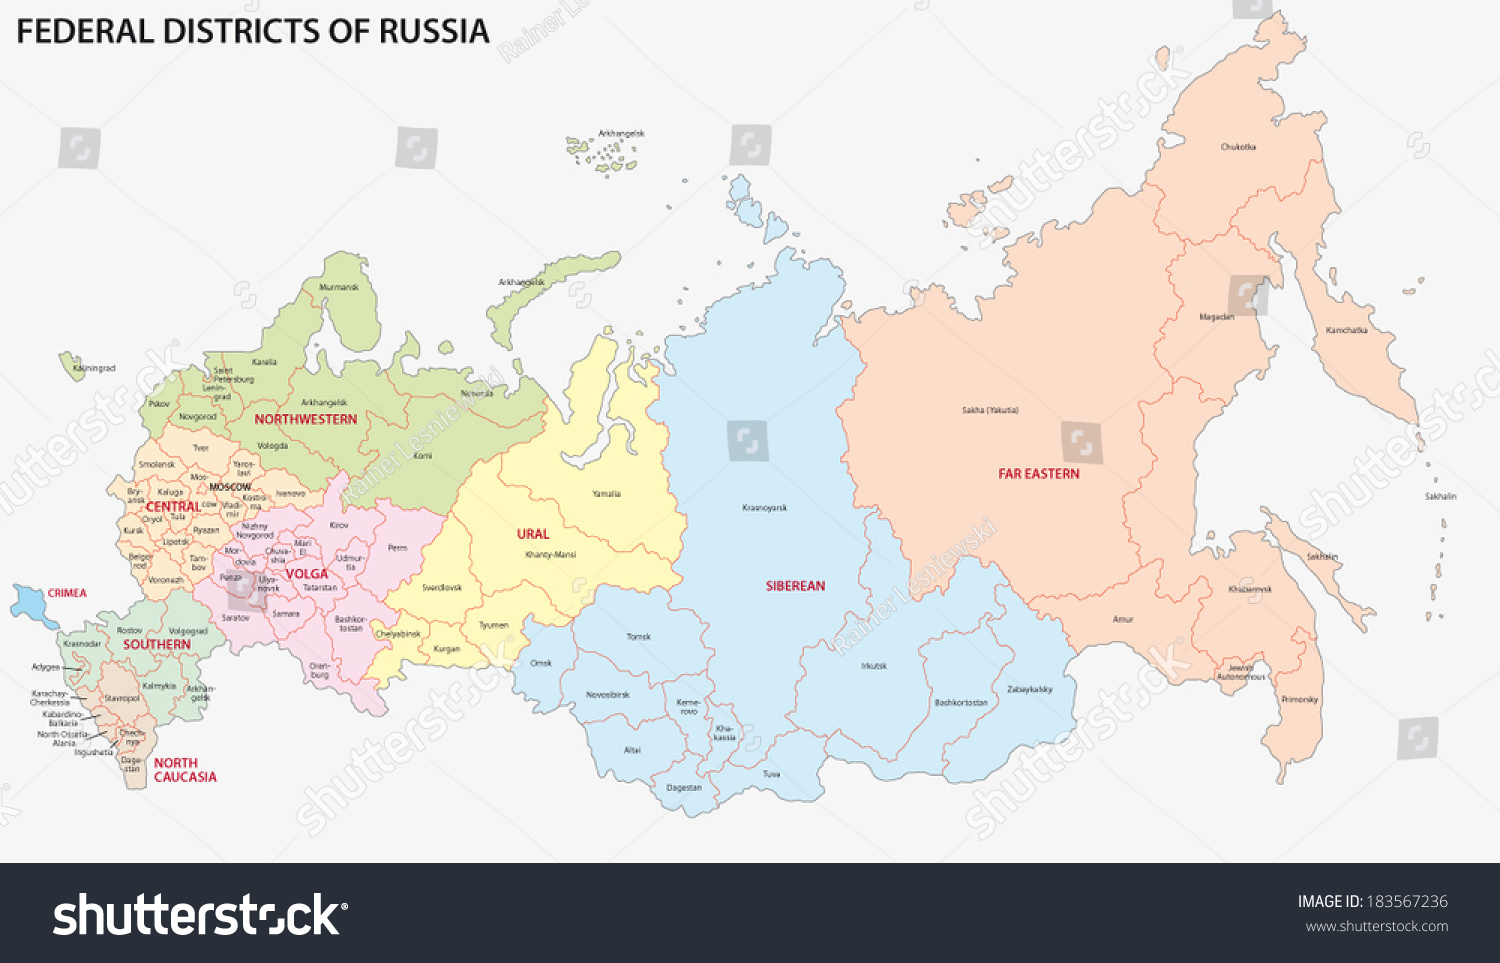 stock-vector-russia-federal-districts-map-183567236.jpg